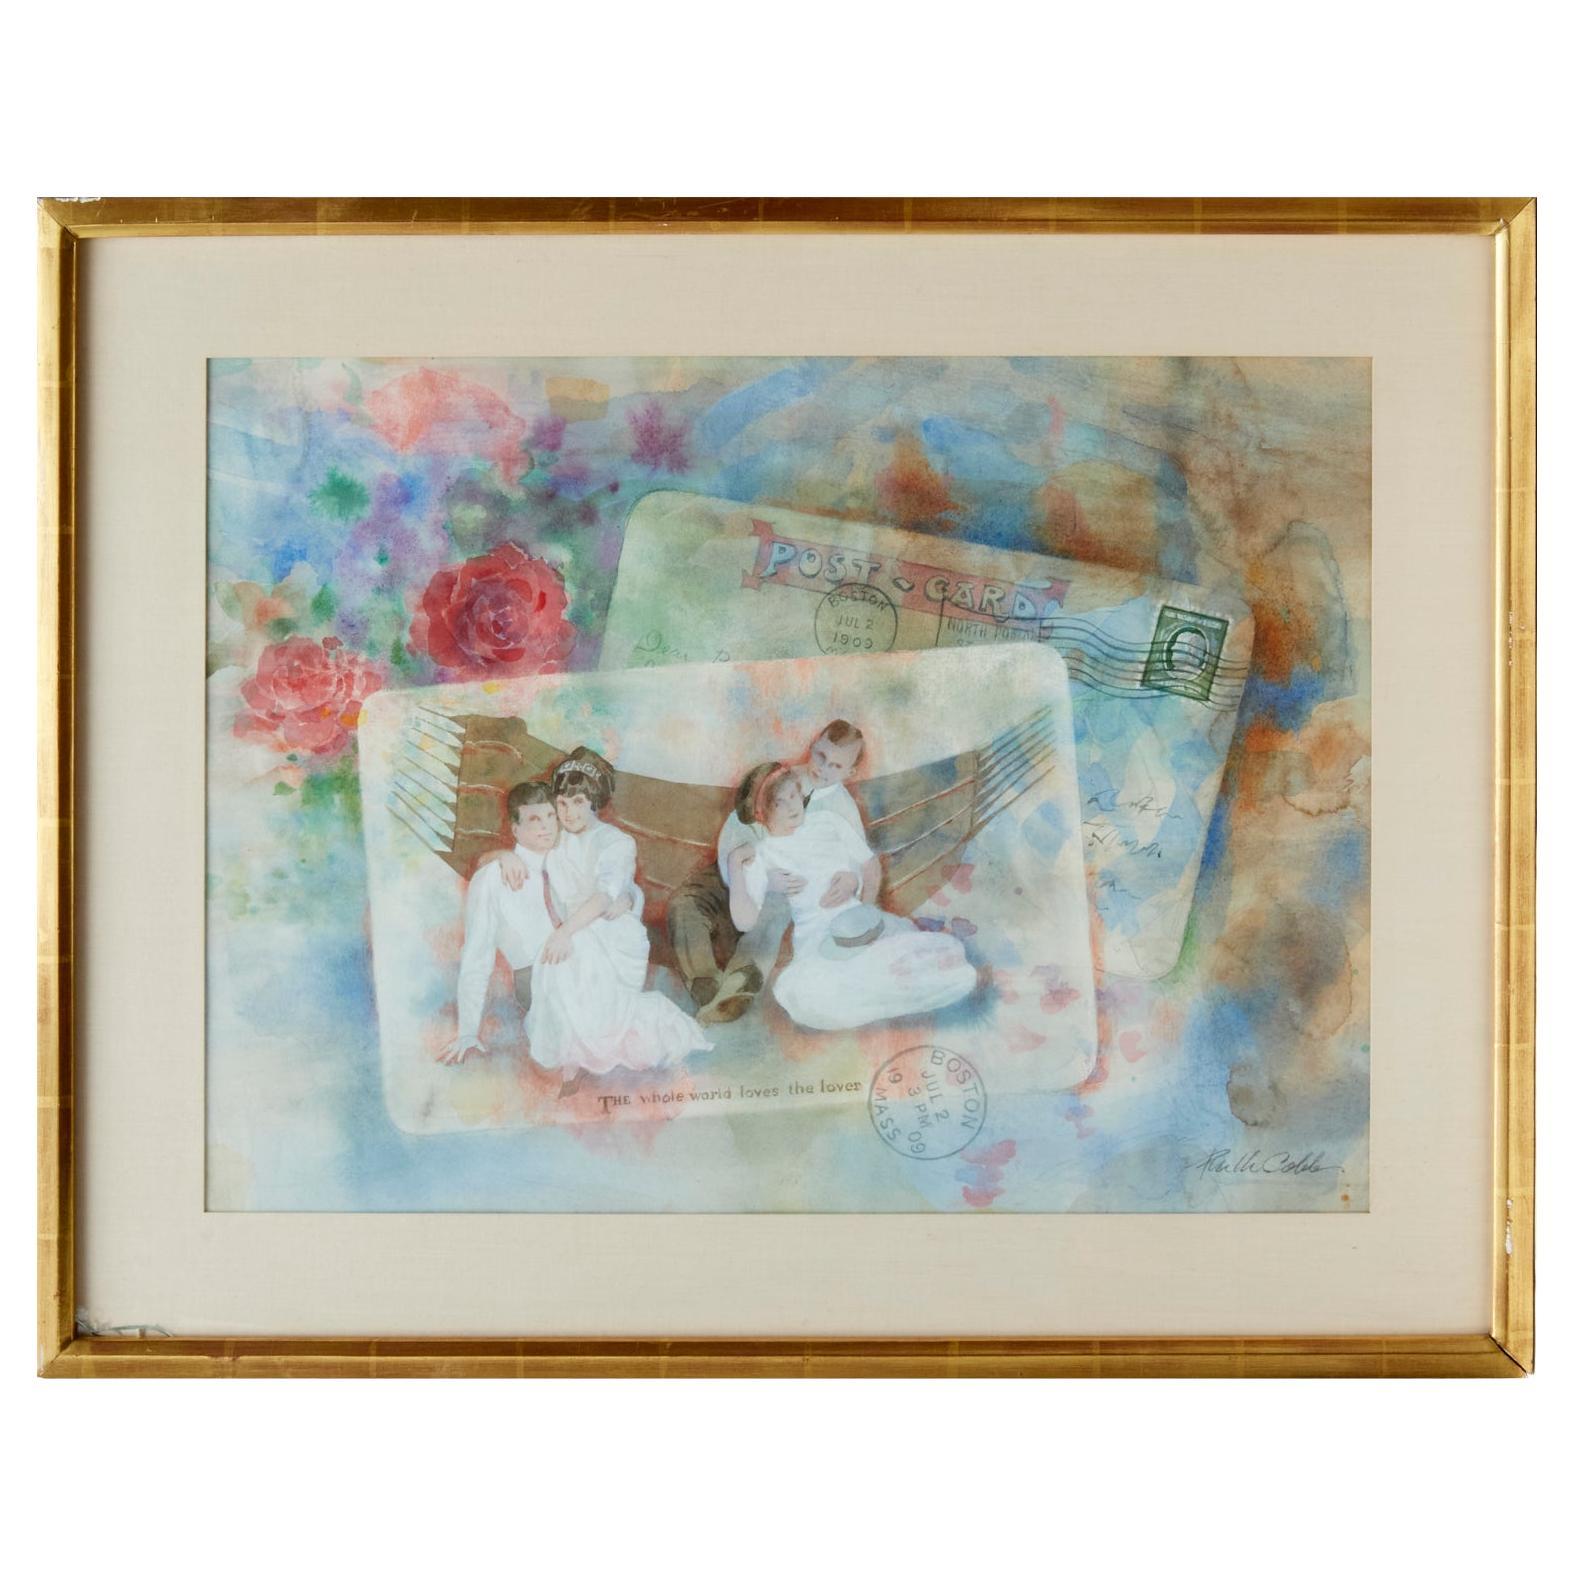 20th C. Ruth Cobb, American Artist, Framed Watercolor on Paper